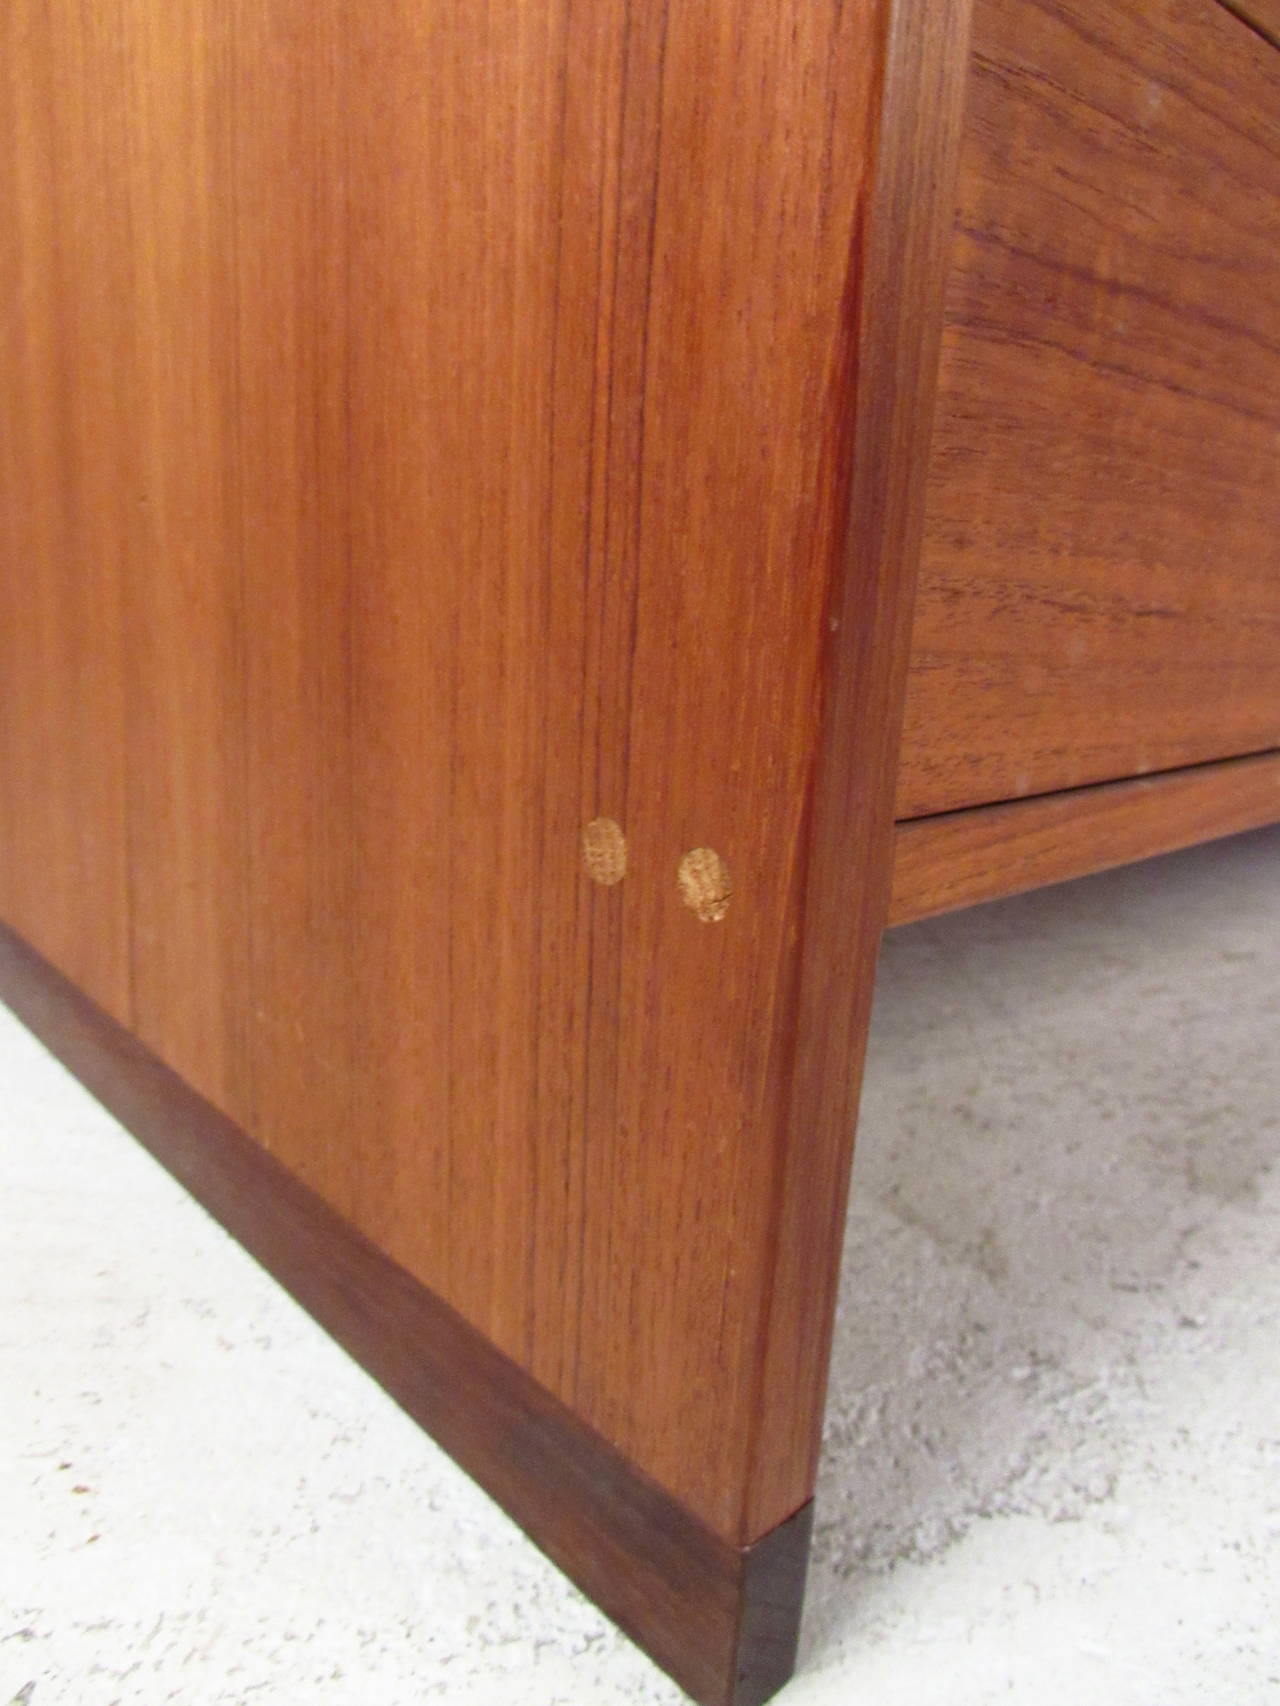 Two vintage dressers made in Denmark, each featuring beautiful teak grain and sculpted pulls. Ideal matching set of drawers for bedroom storage, stunning midcentury Scandinavian design. 

Please confirm item location NY or NJ with dealer.